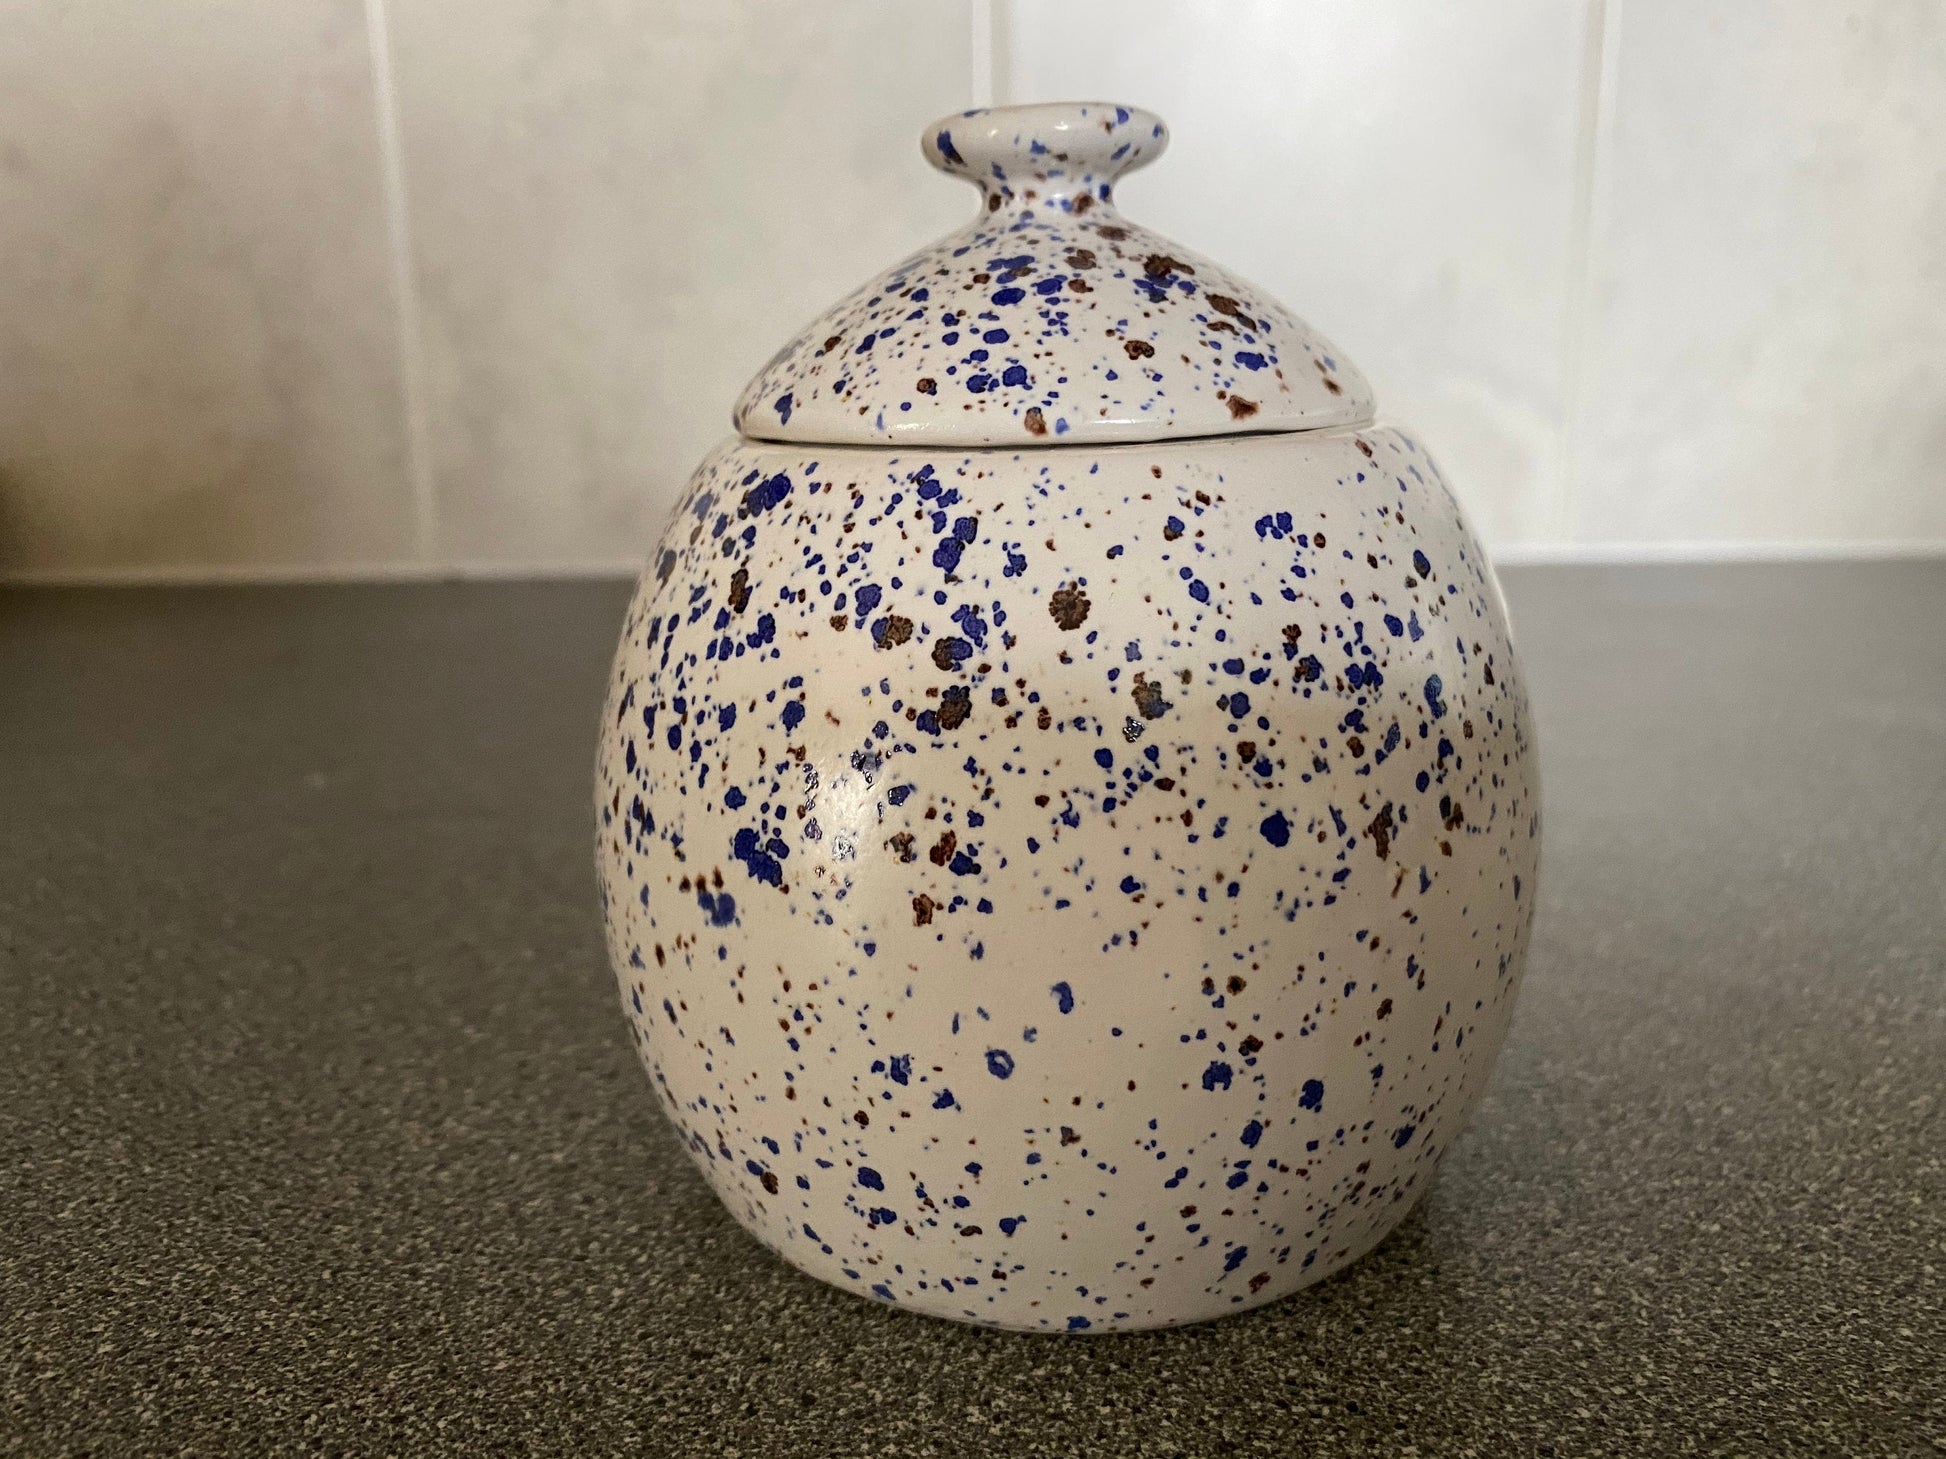 Sugar Bowl with Lid and Spoon in Speckled Blue Glaze - PeterBowenArt